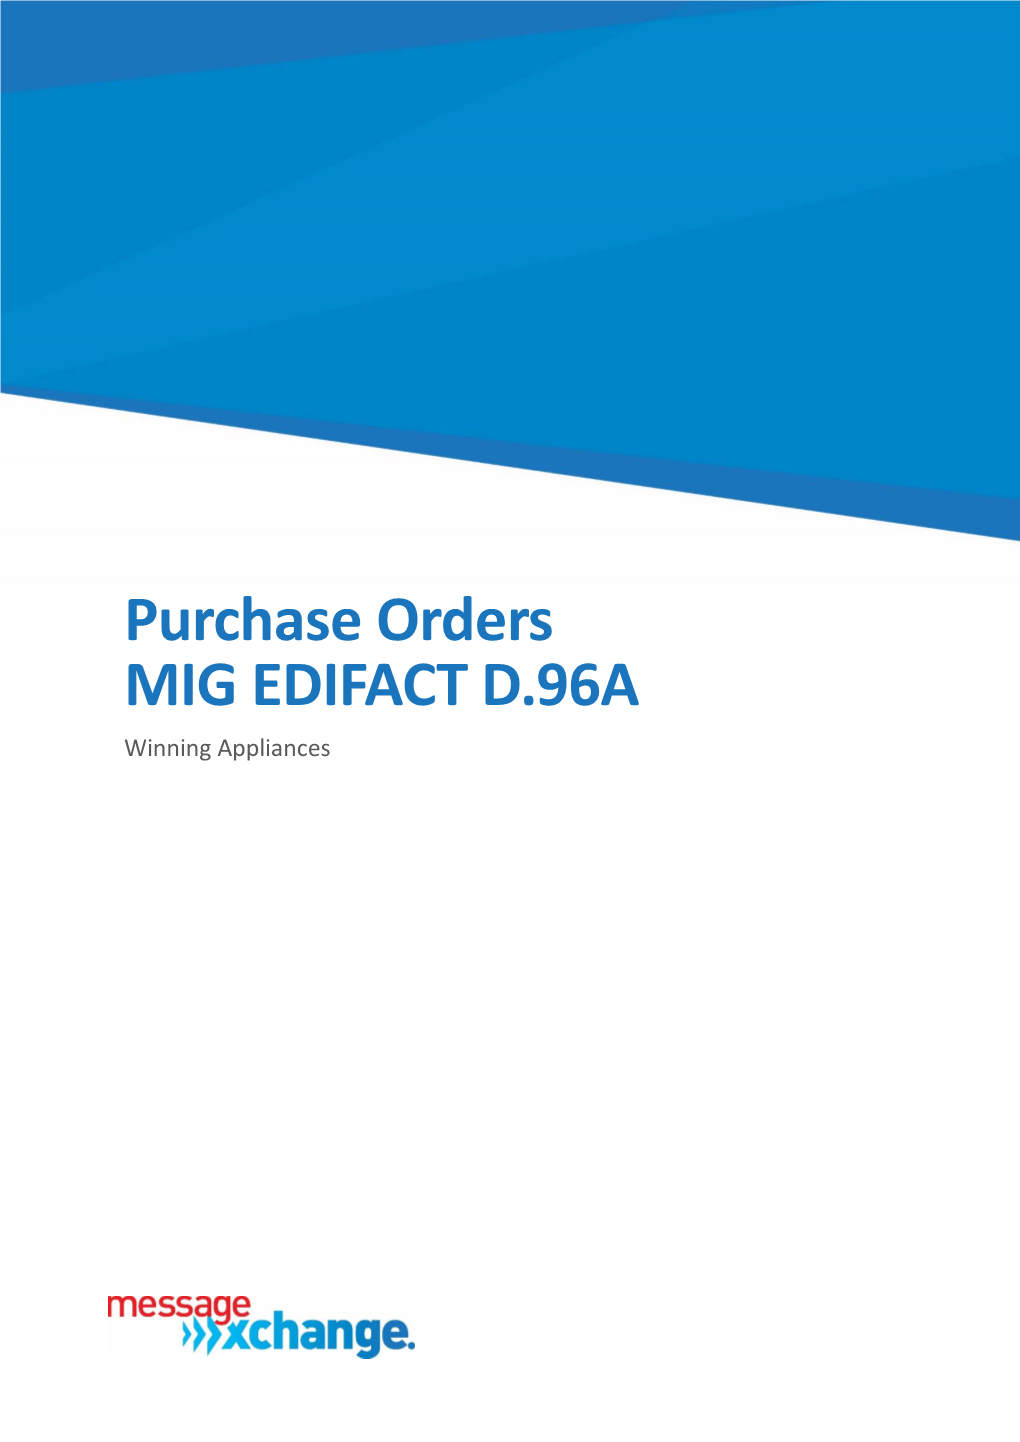 Purchase Orders MIG EDIFACT D.96A Winning Appliances